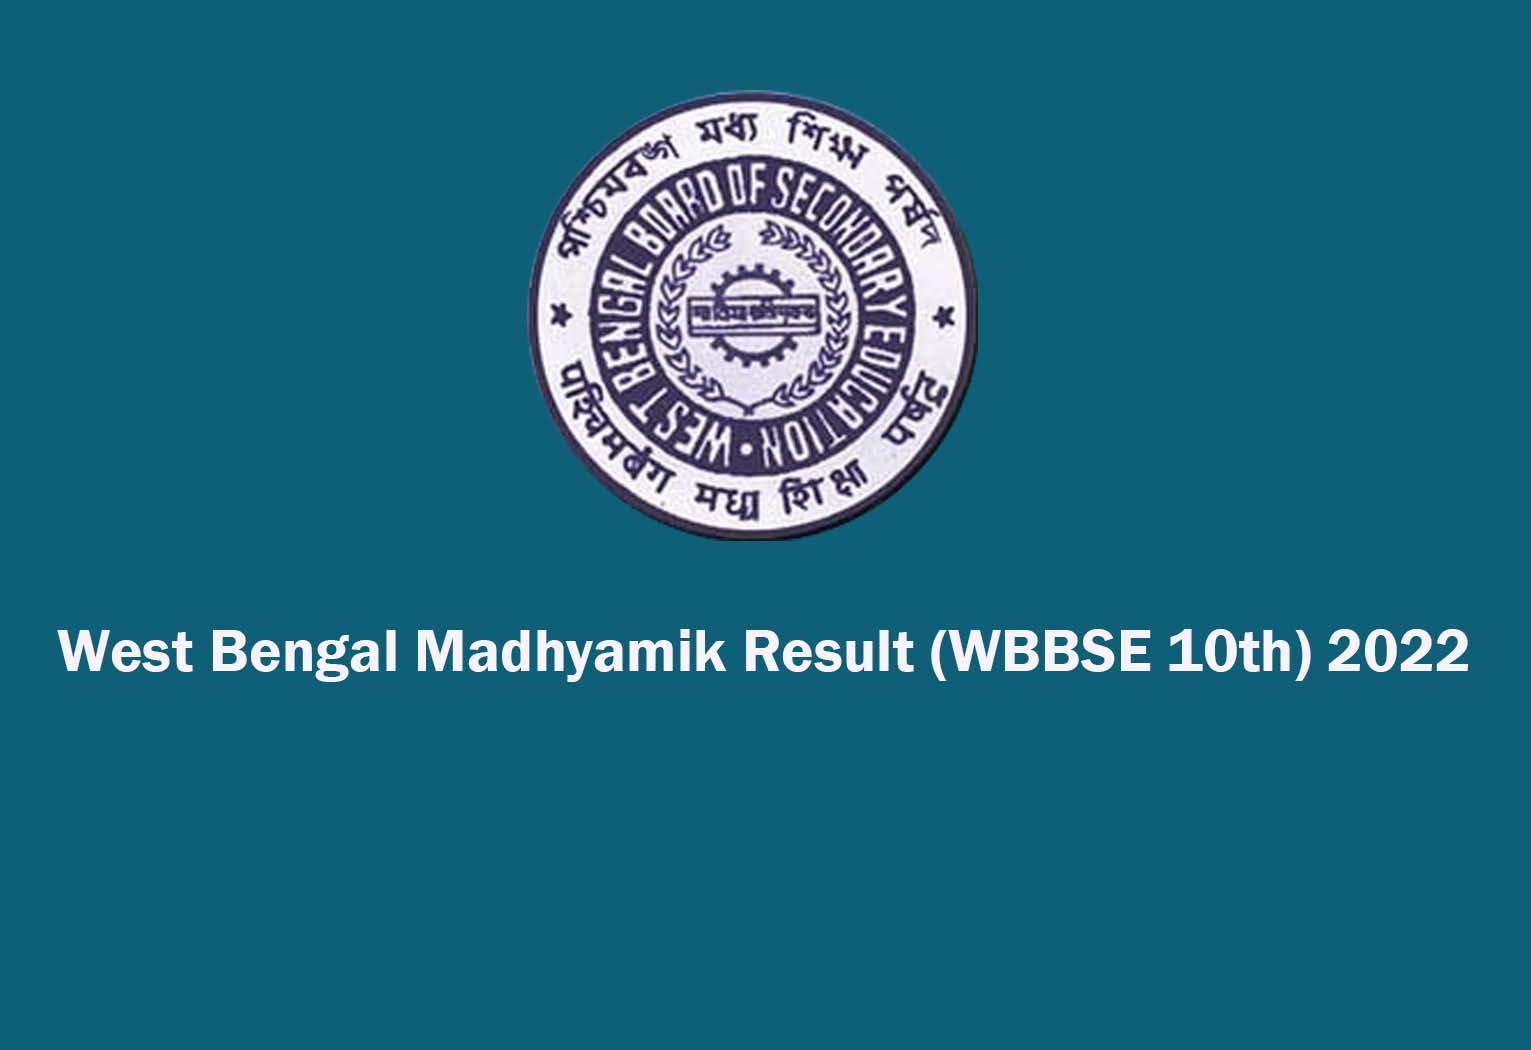 West Bengal Madhyamik Result (WBBSE 10th) 2022